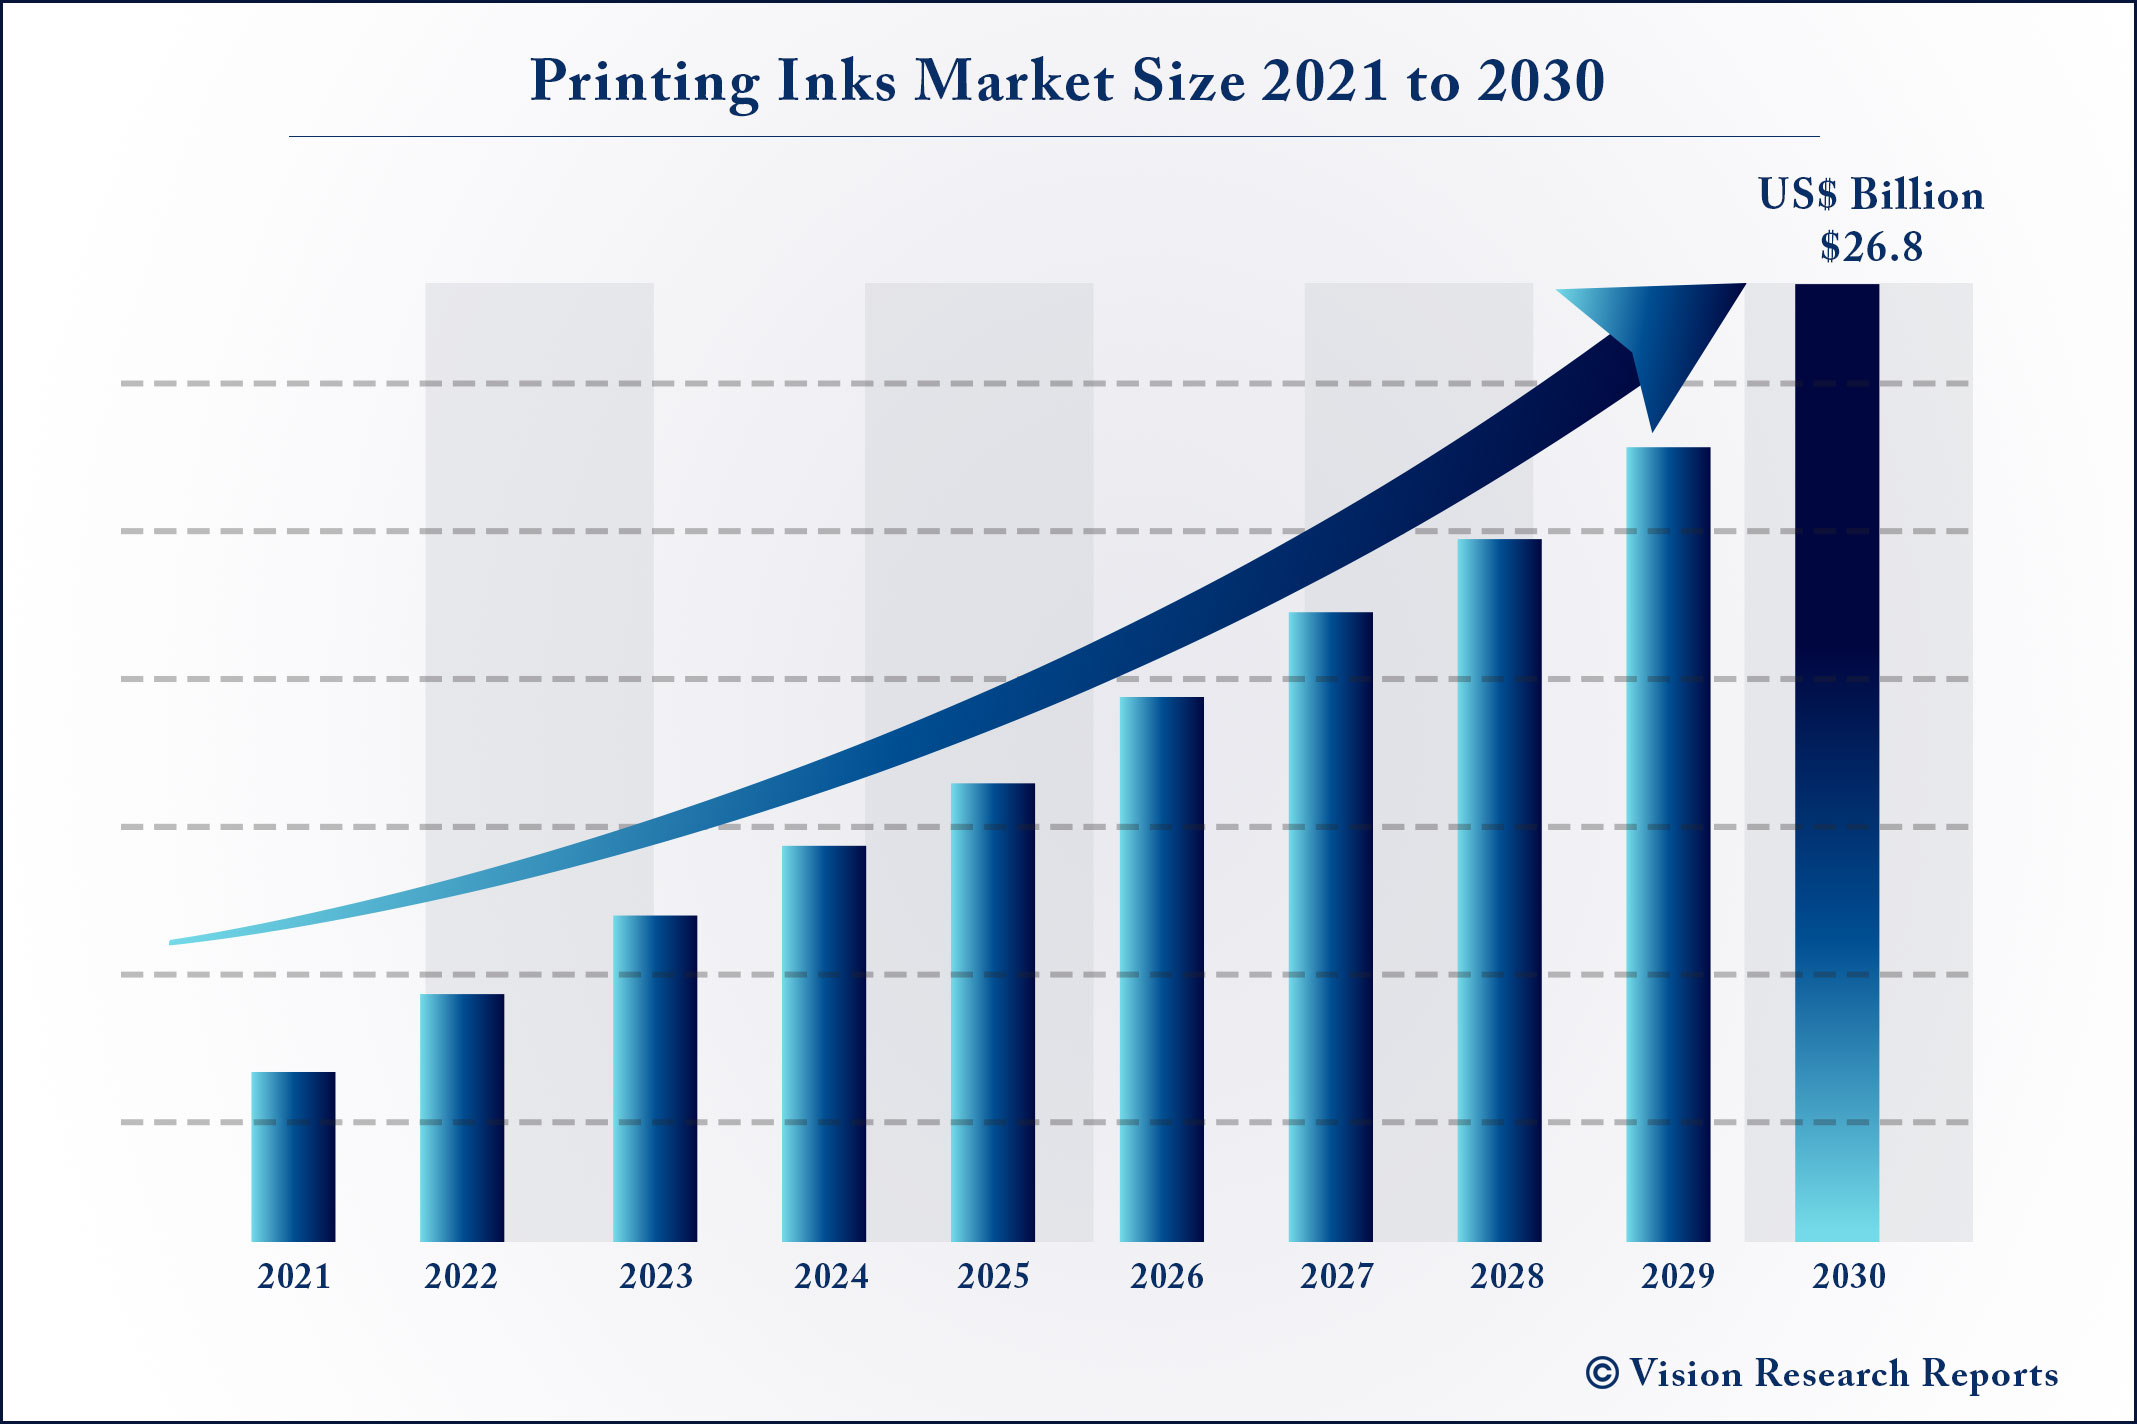 Printing Inks Market Size 2021 to 2030